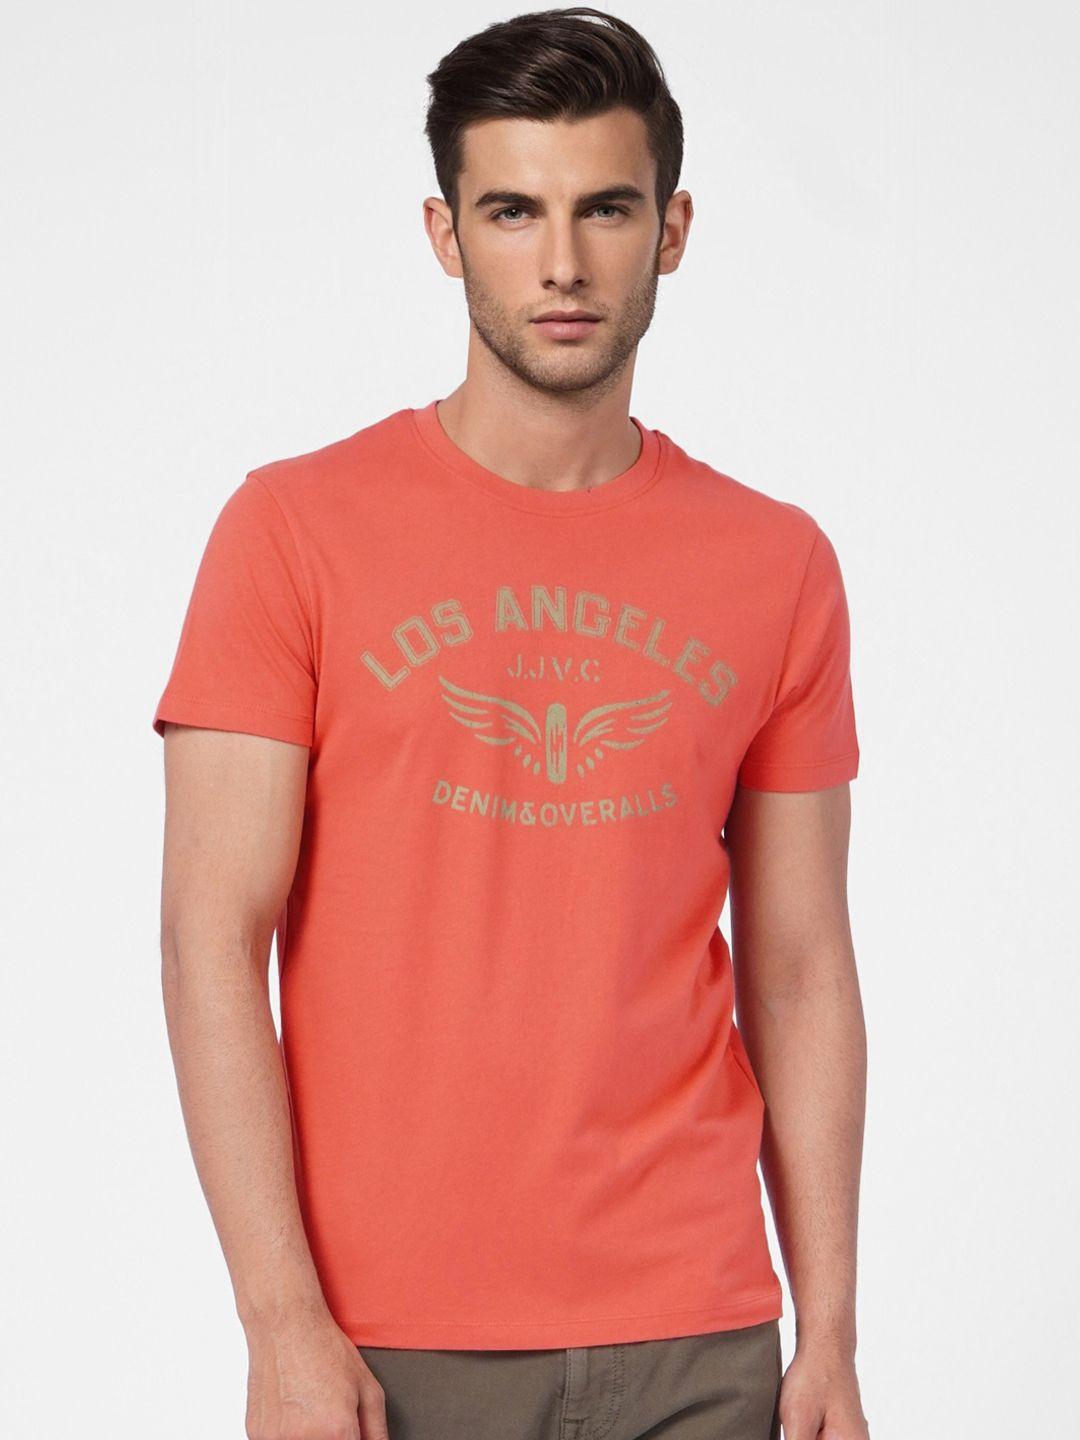 jack & jones men coral red graphic printed pure cotton slim fit casual t-shirt